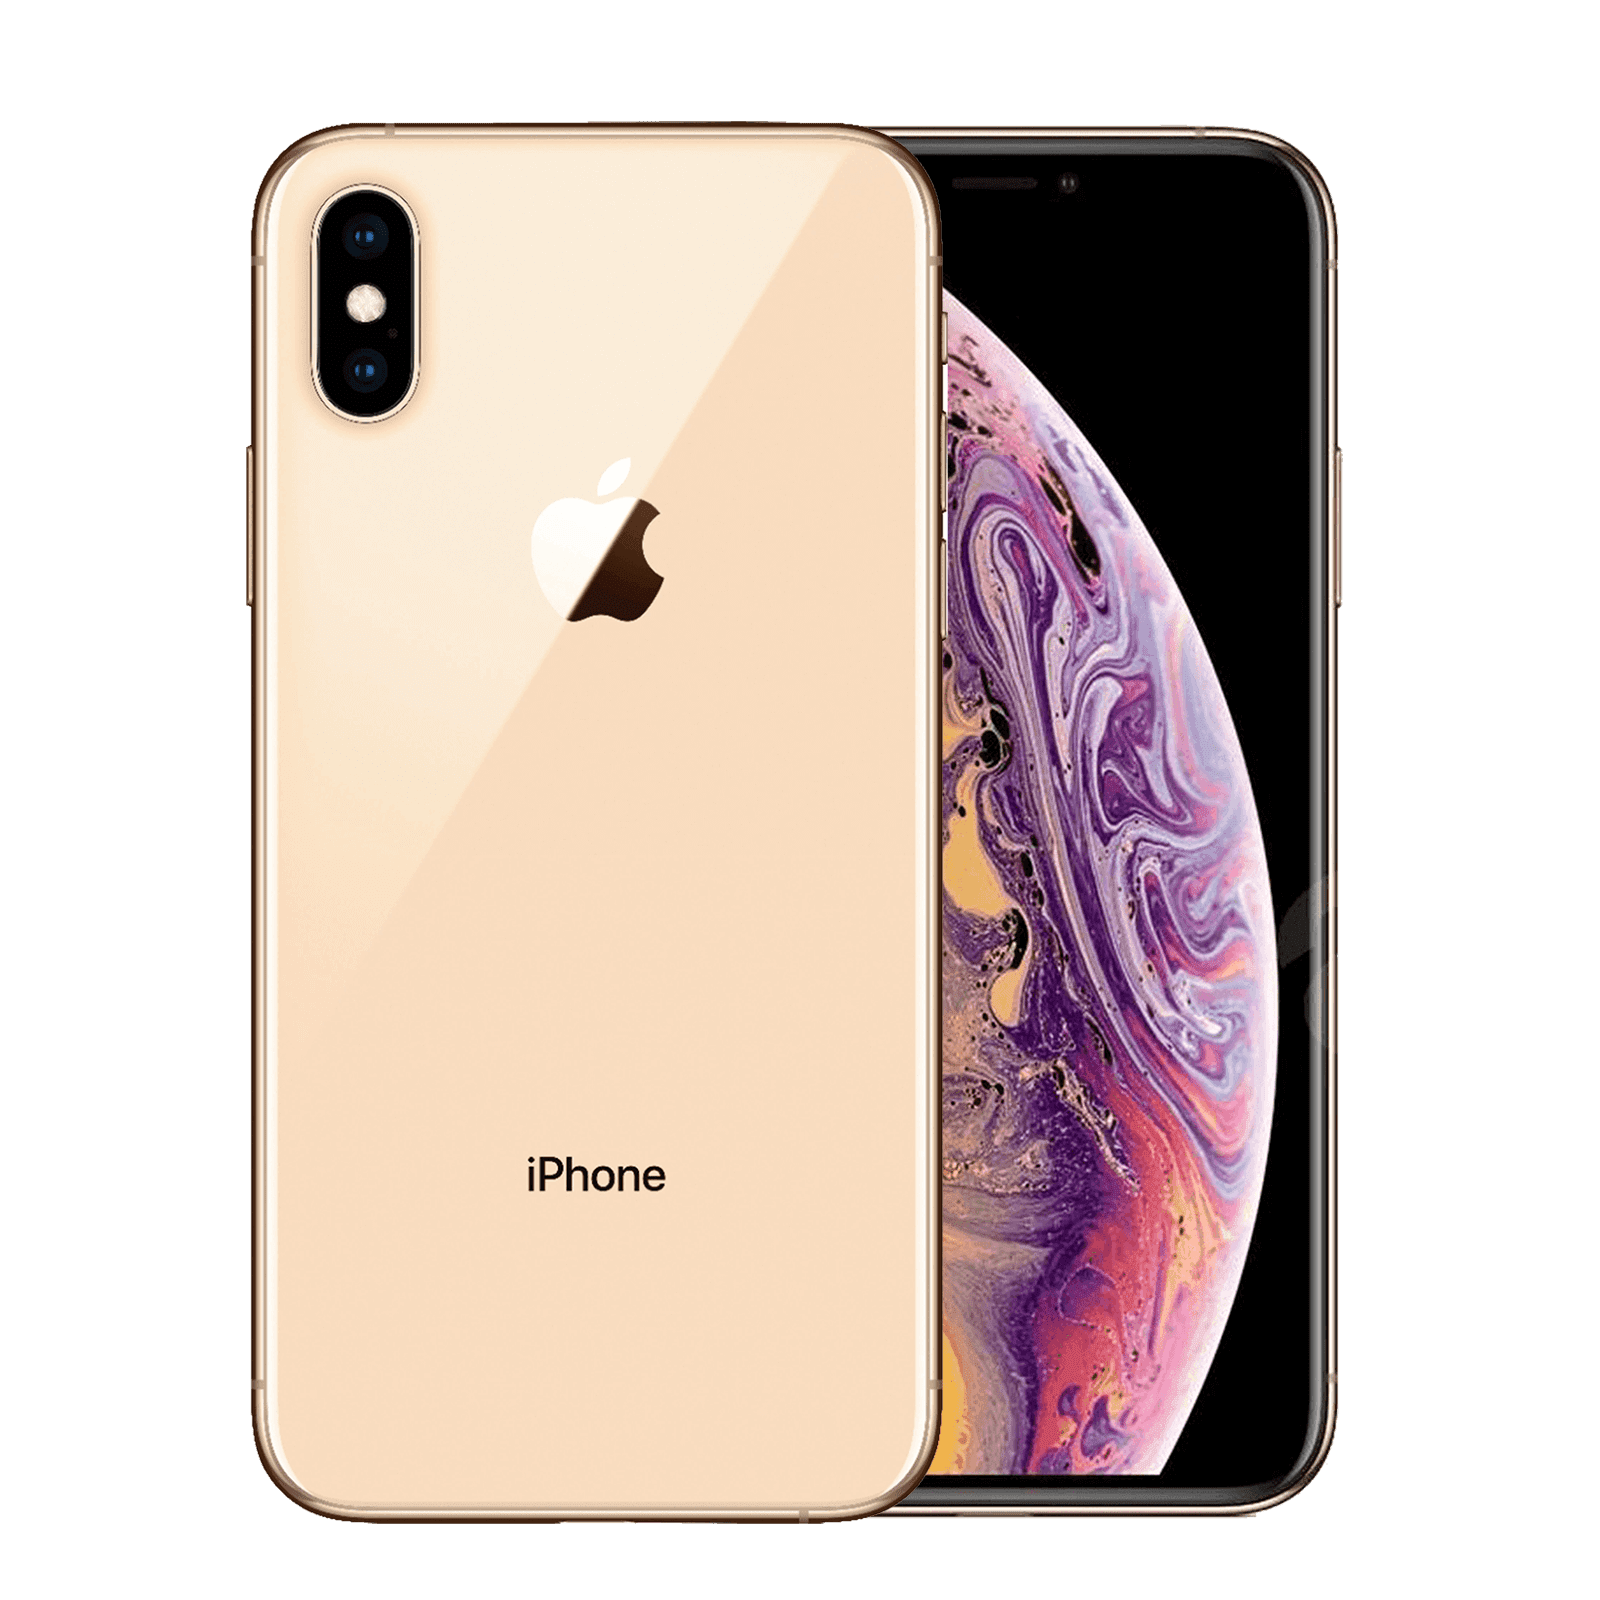 Apple iPhone XS Max 64GB Gold (Unlocked) Used Grade A+